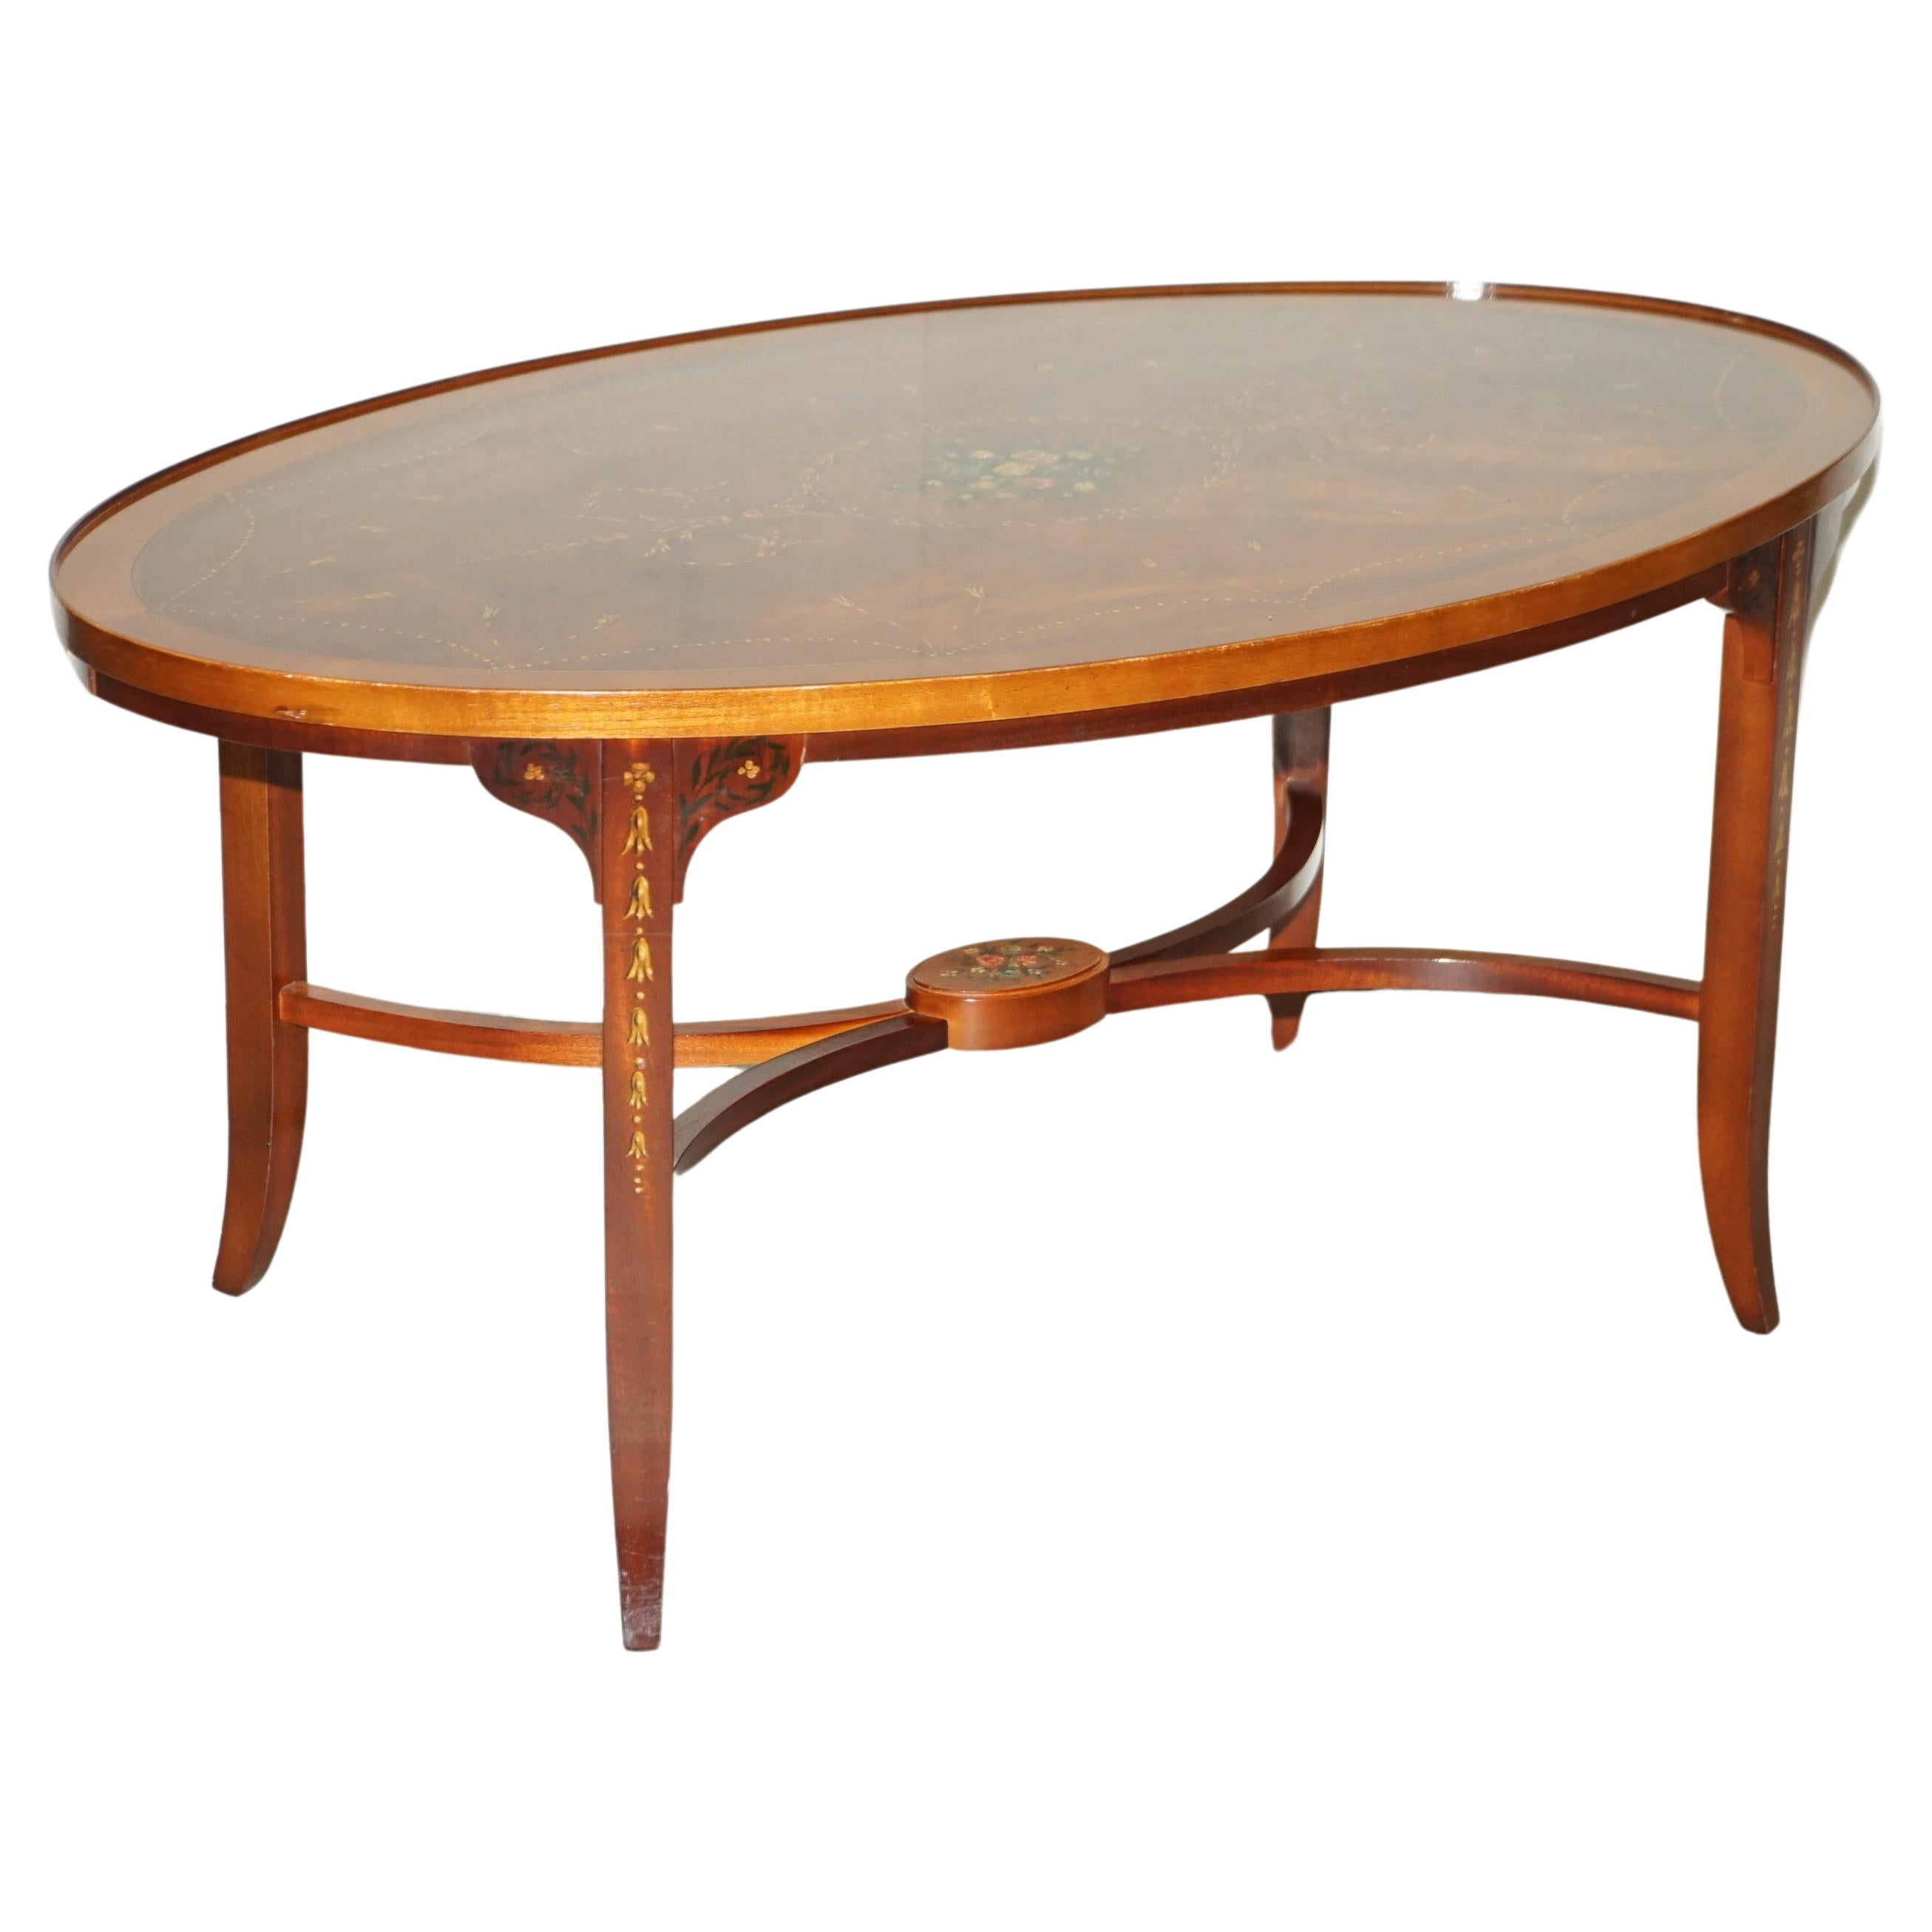 Stunning Oval Hardwood Coffee Table With Splayed Legs Decorative Floral Detail